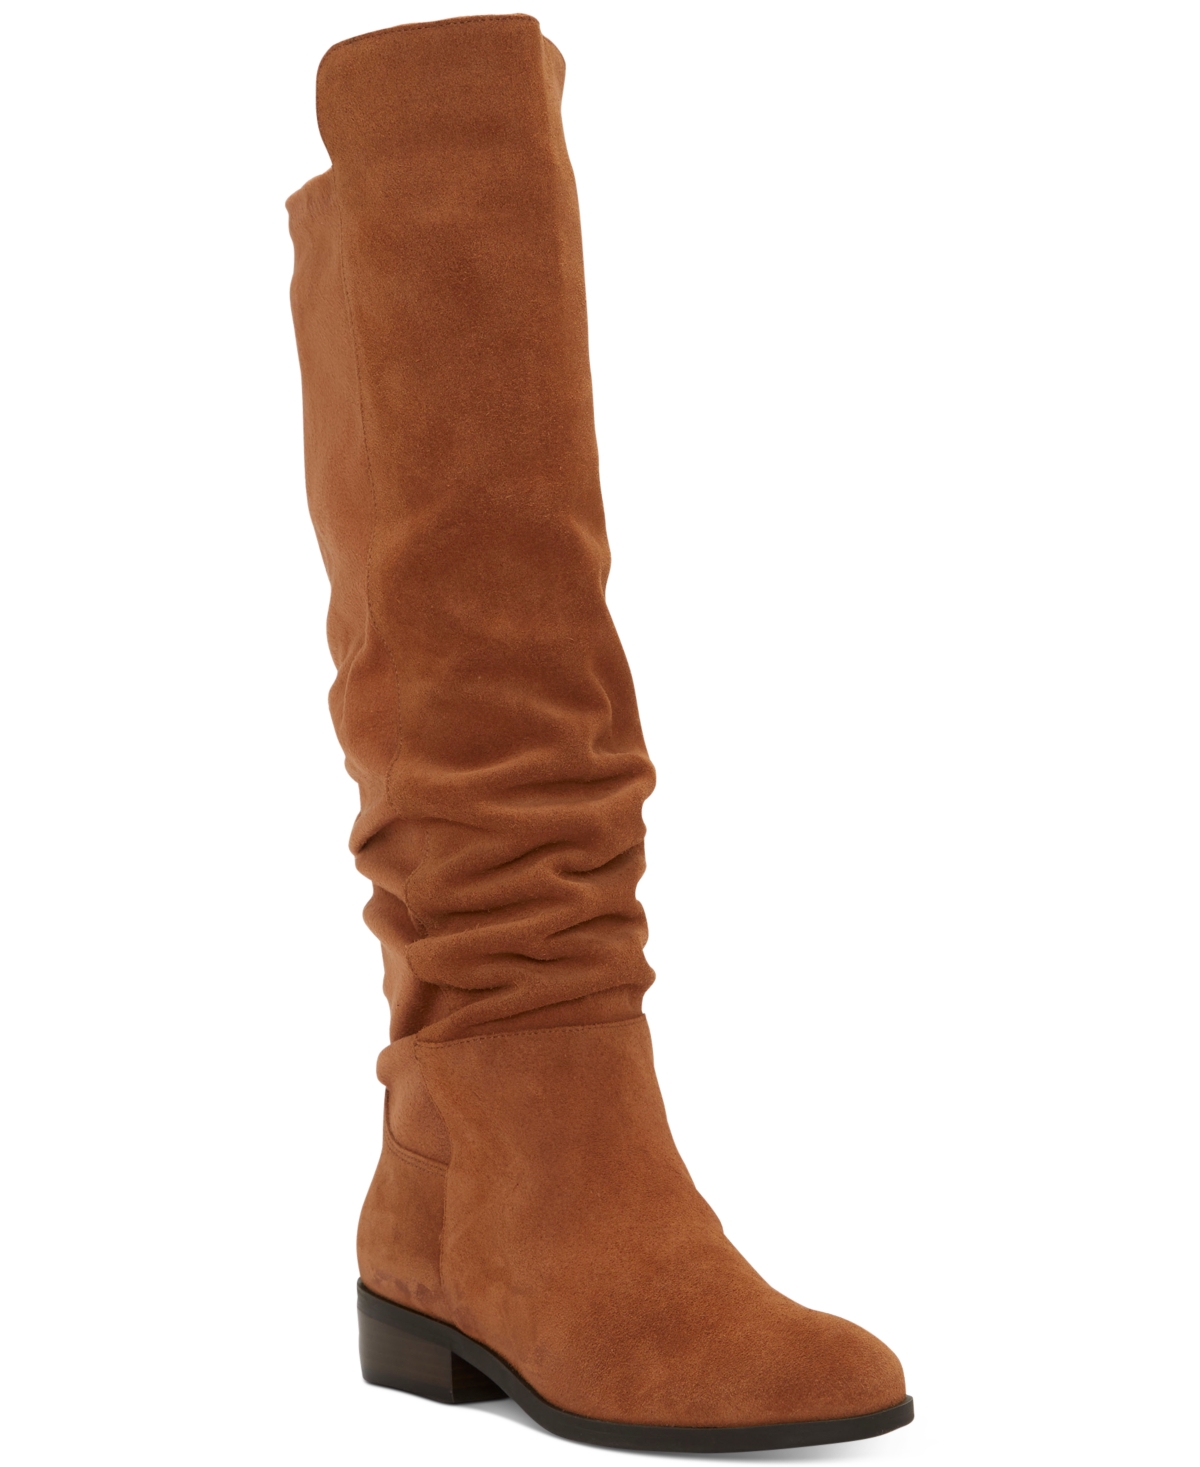 Women's Calypso Over-The-Knee Boots - Ginger